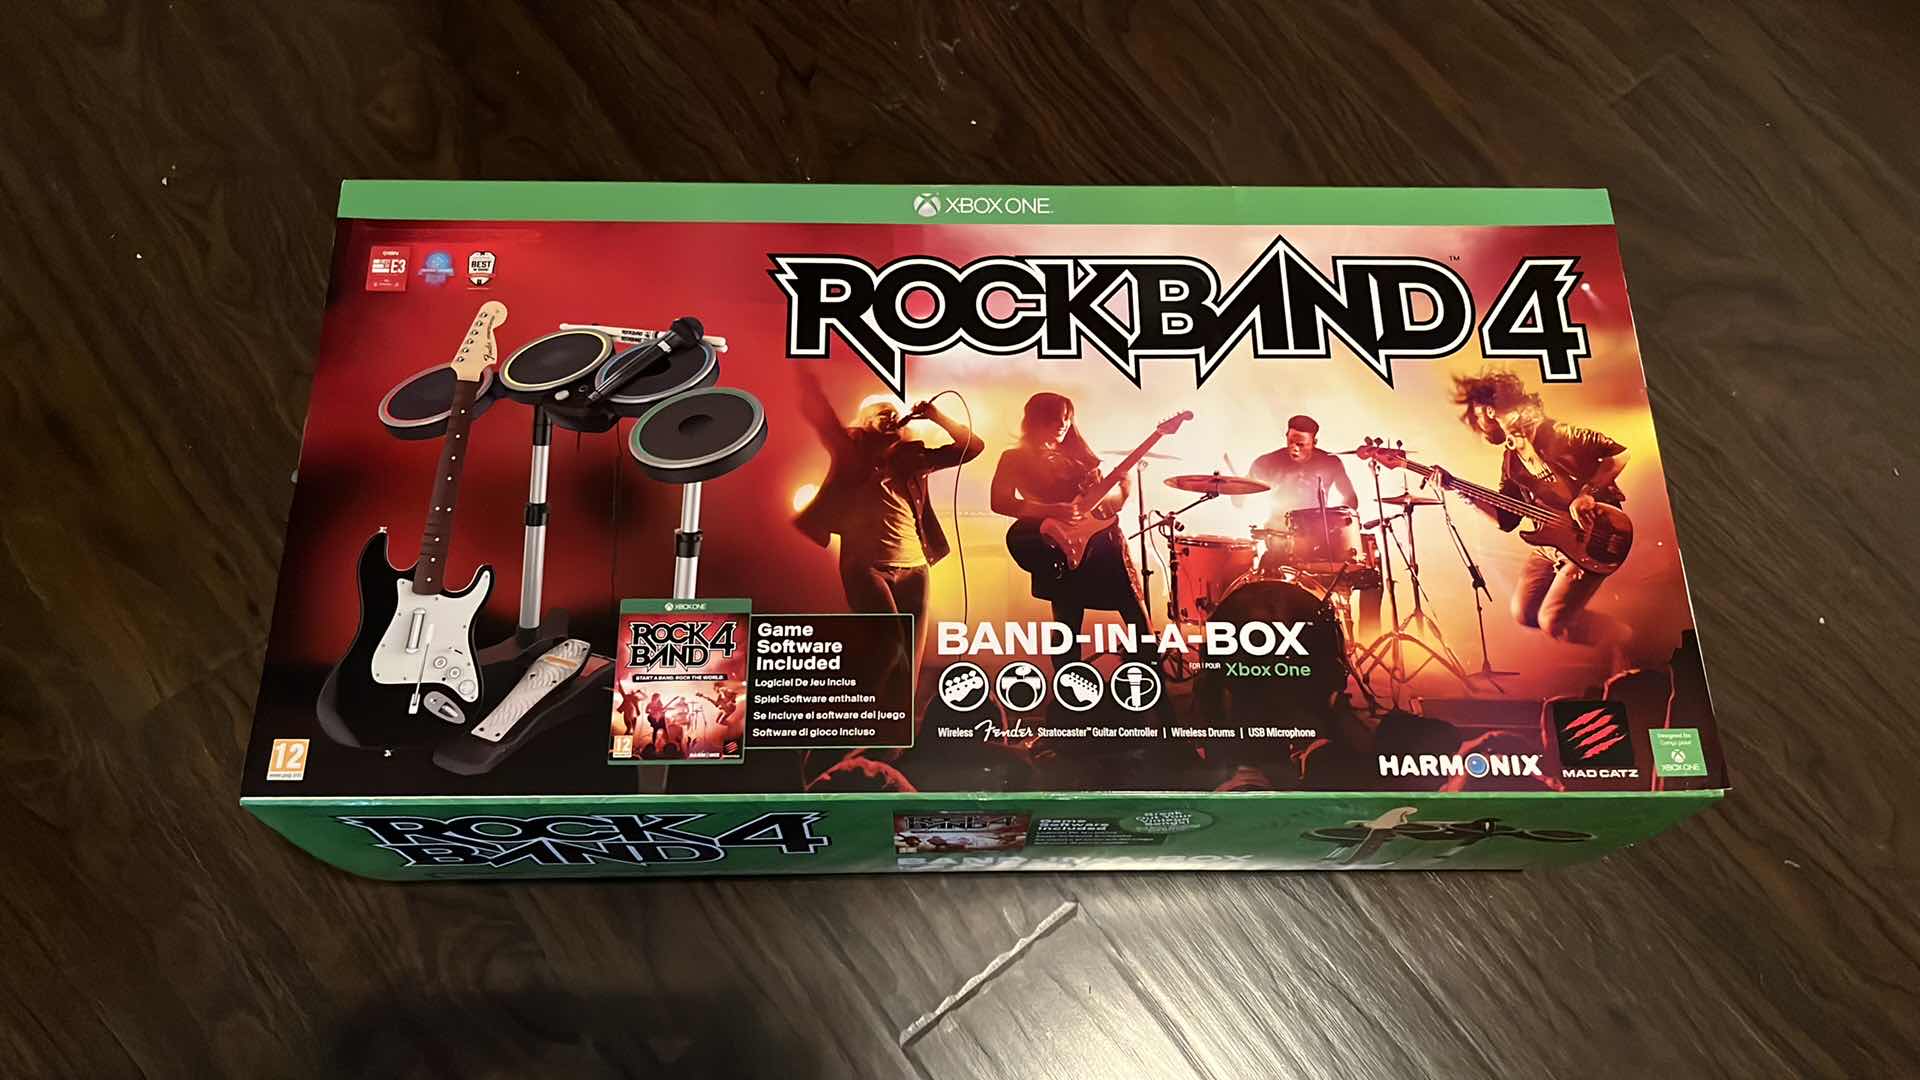 Photo 1 of NEW XBOX ONE ROCKBAND 4 BAND-IN-A-BOX